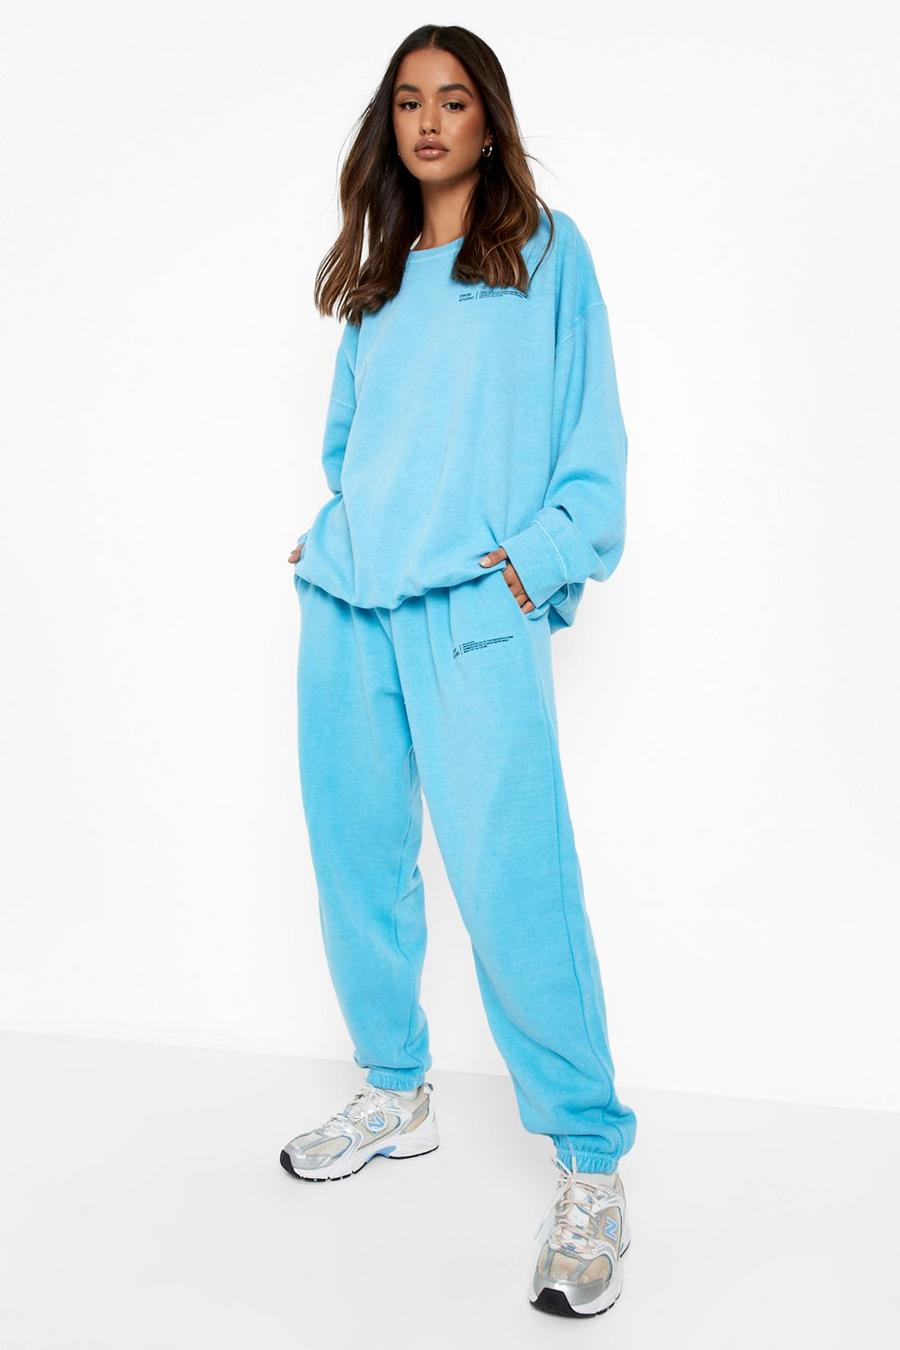 Aqua blue Text Print Embroidered Overdyed Tracksuit